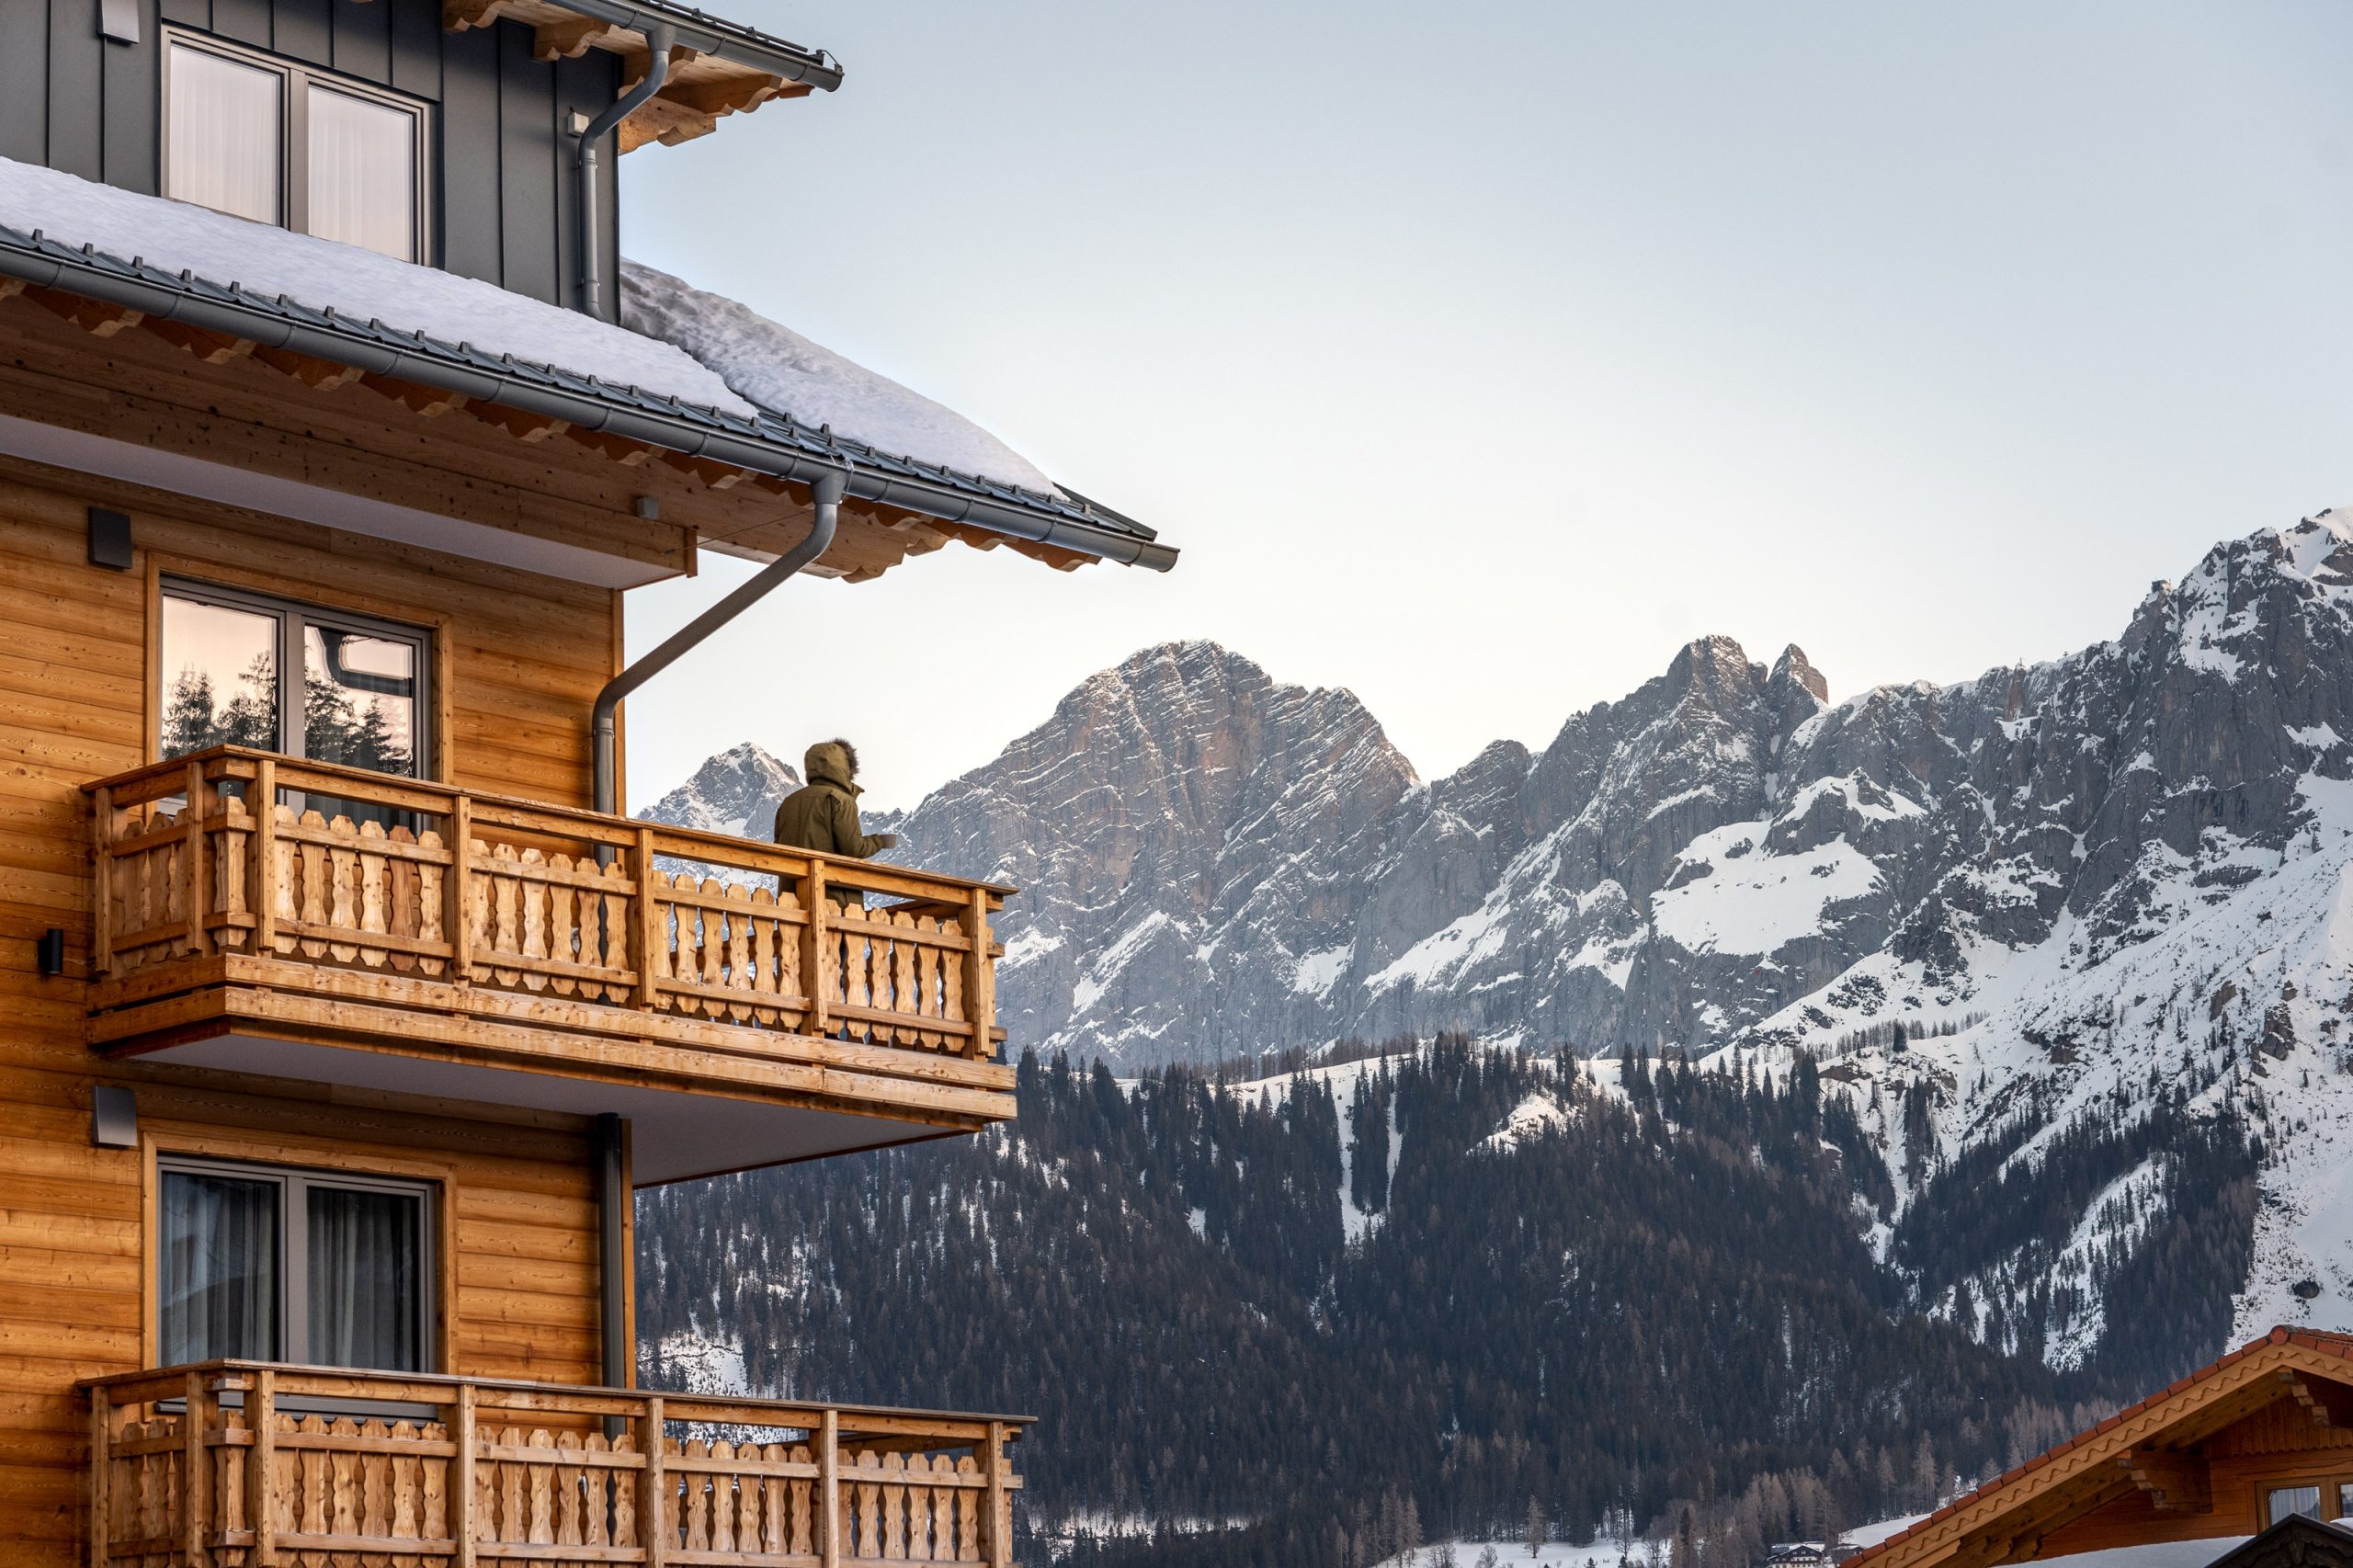 The Hotel at Dachstein Offers A Tranquil Setting For Relaxation post thumbnail image